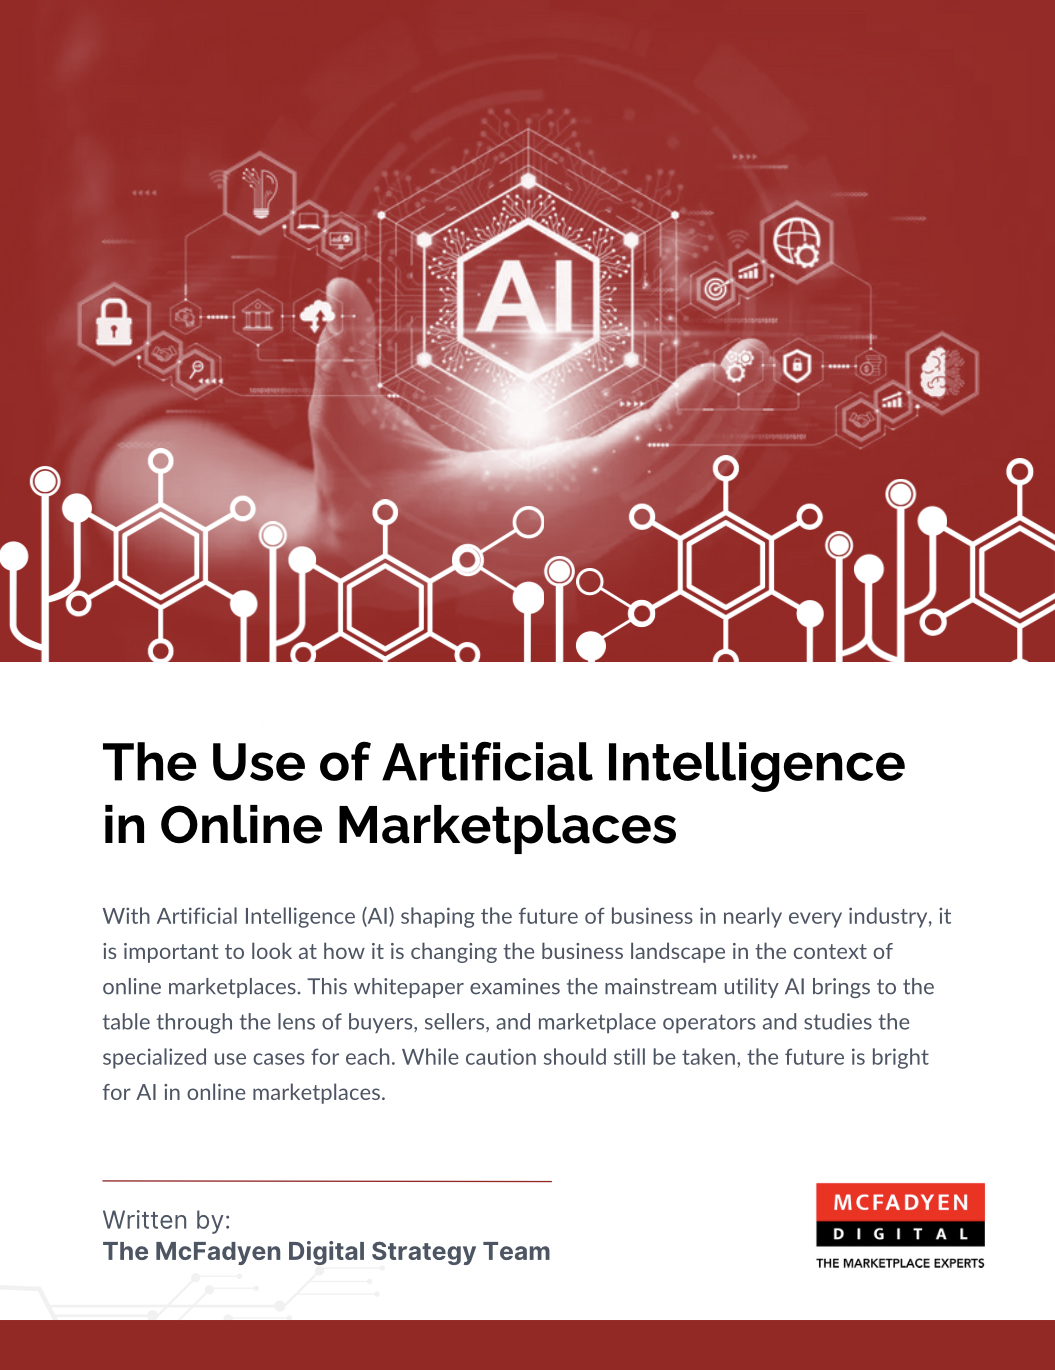 The Use of Artificial Intelligence in Marketplaces